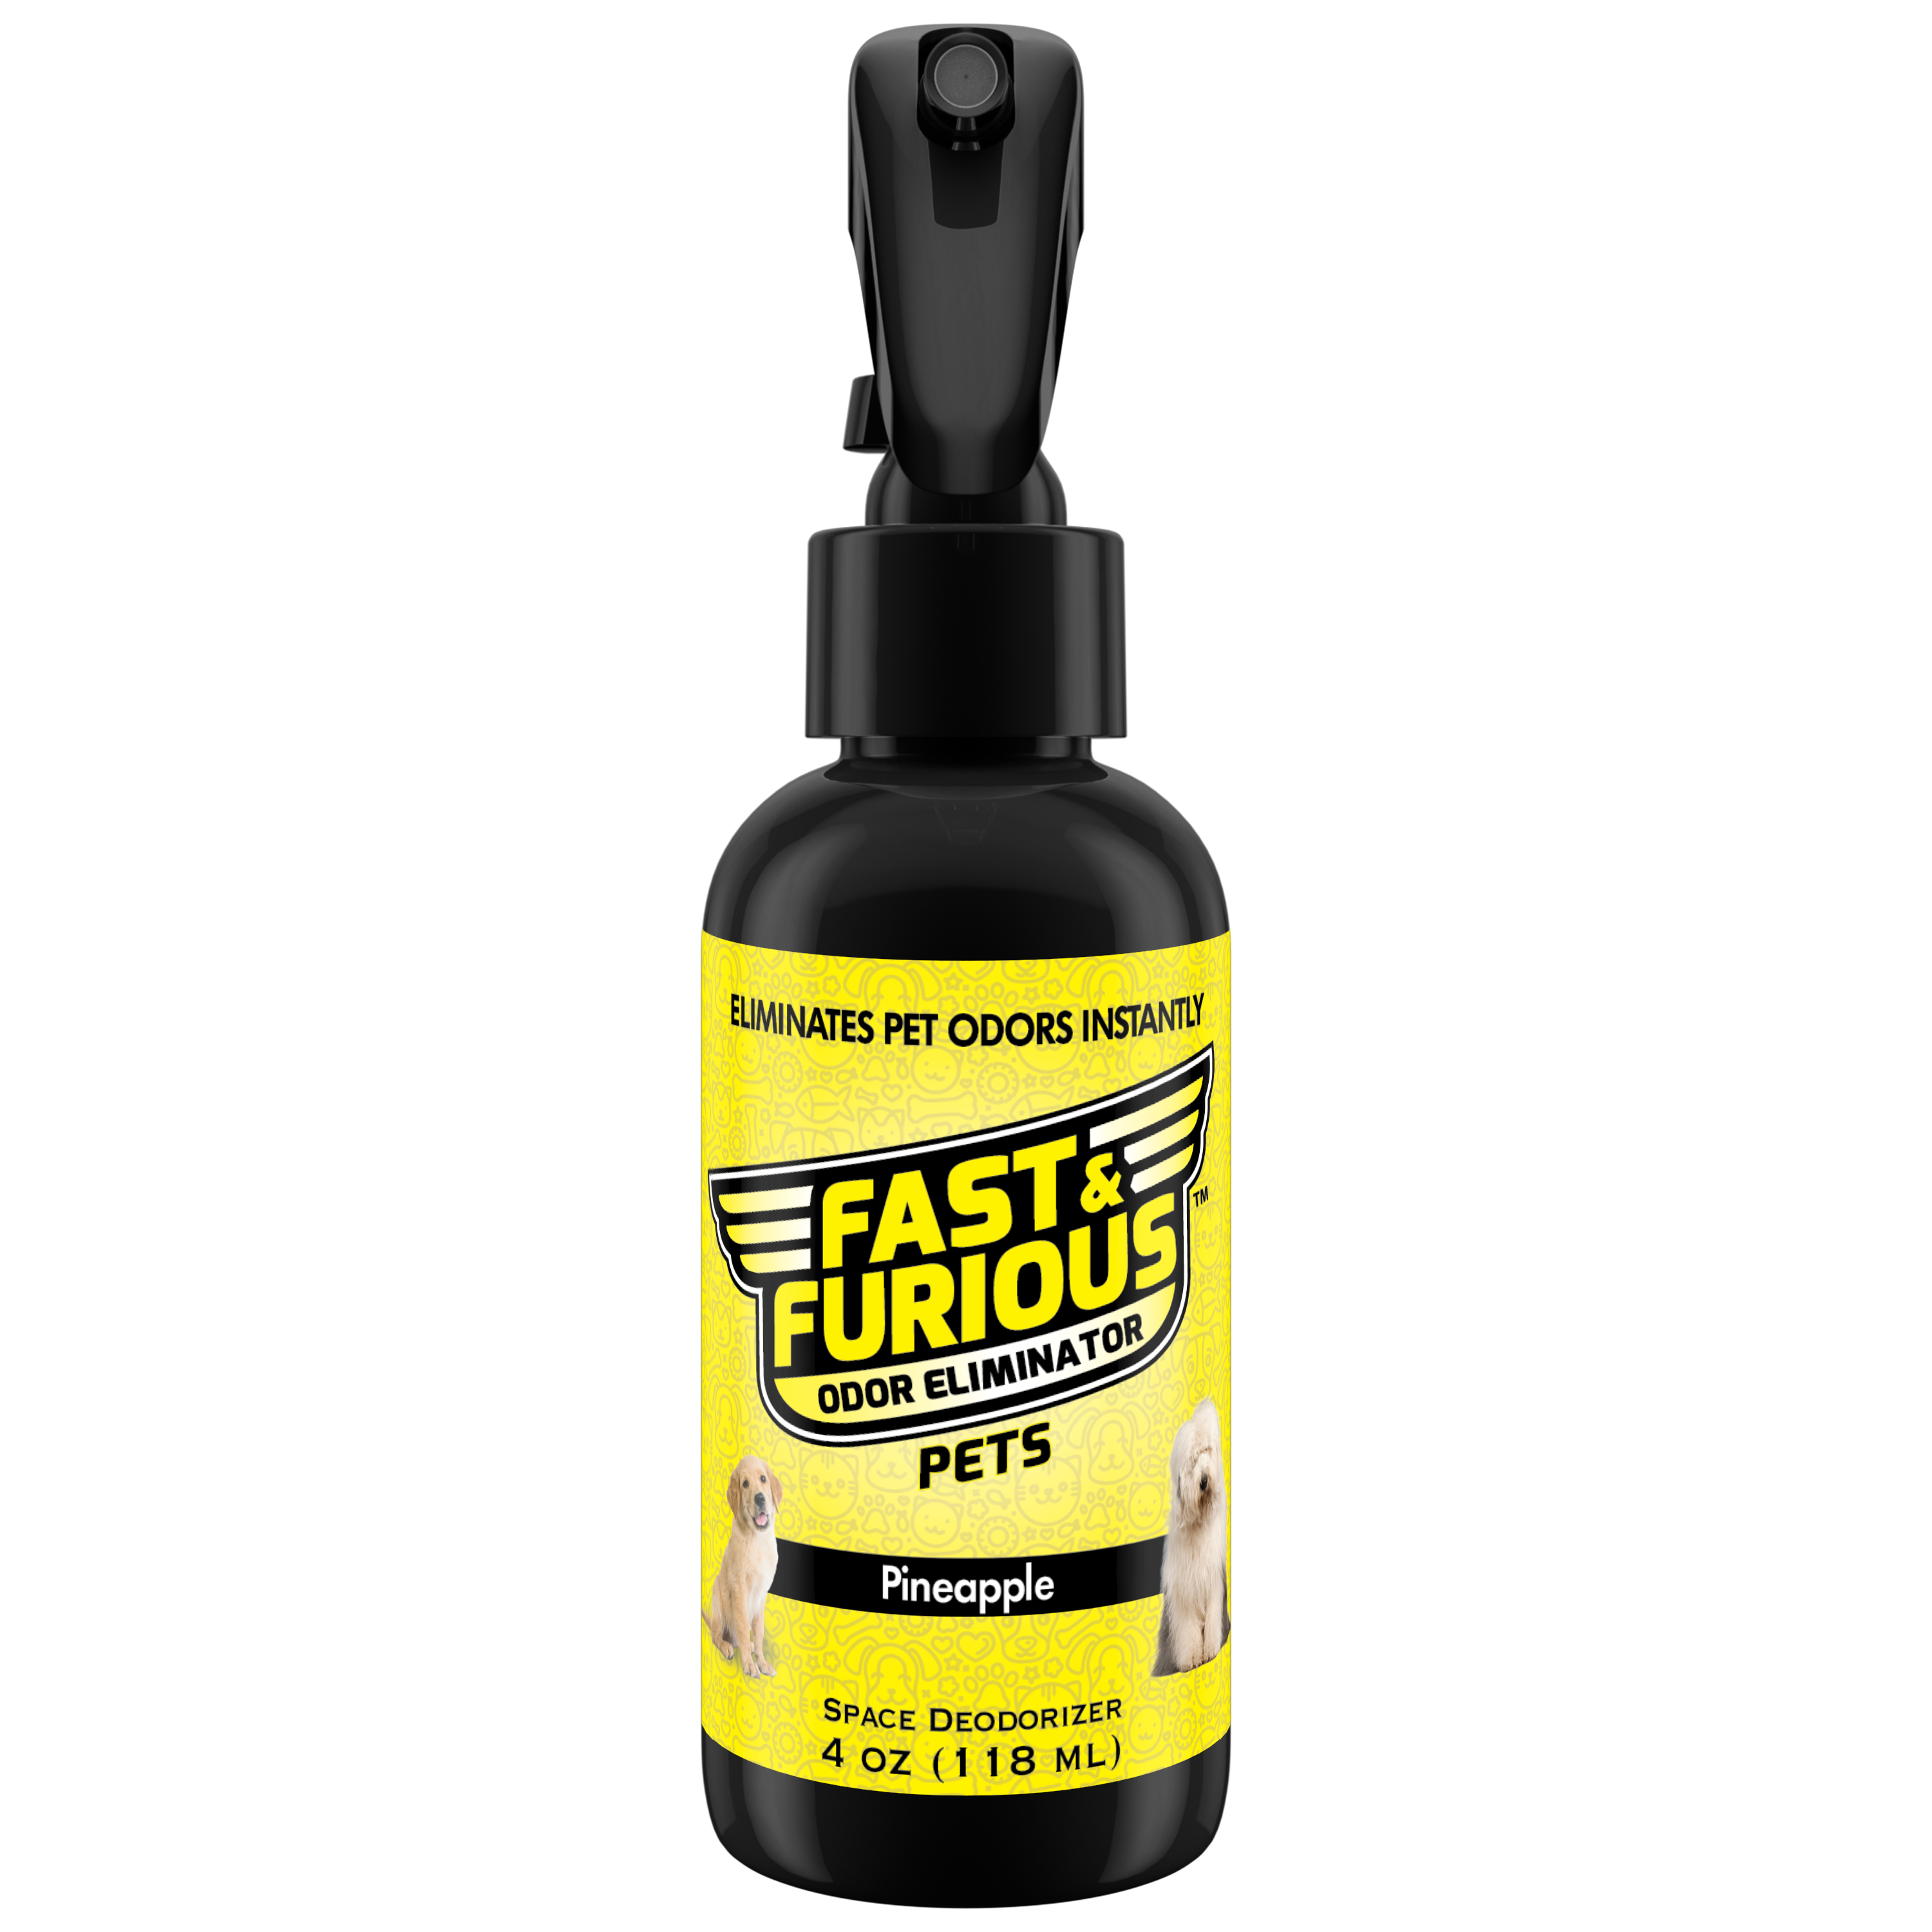 Fast and Furious Pets Odor Eliminator - Pineapple Scent